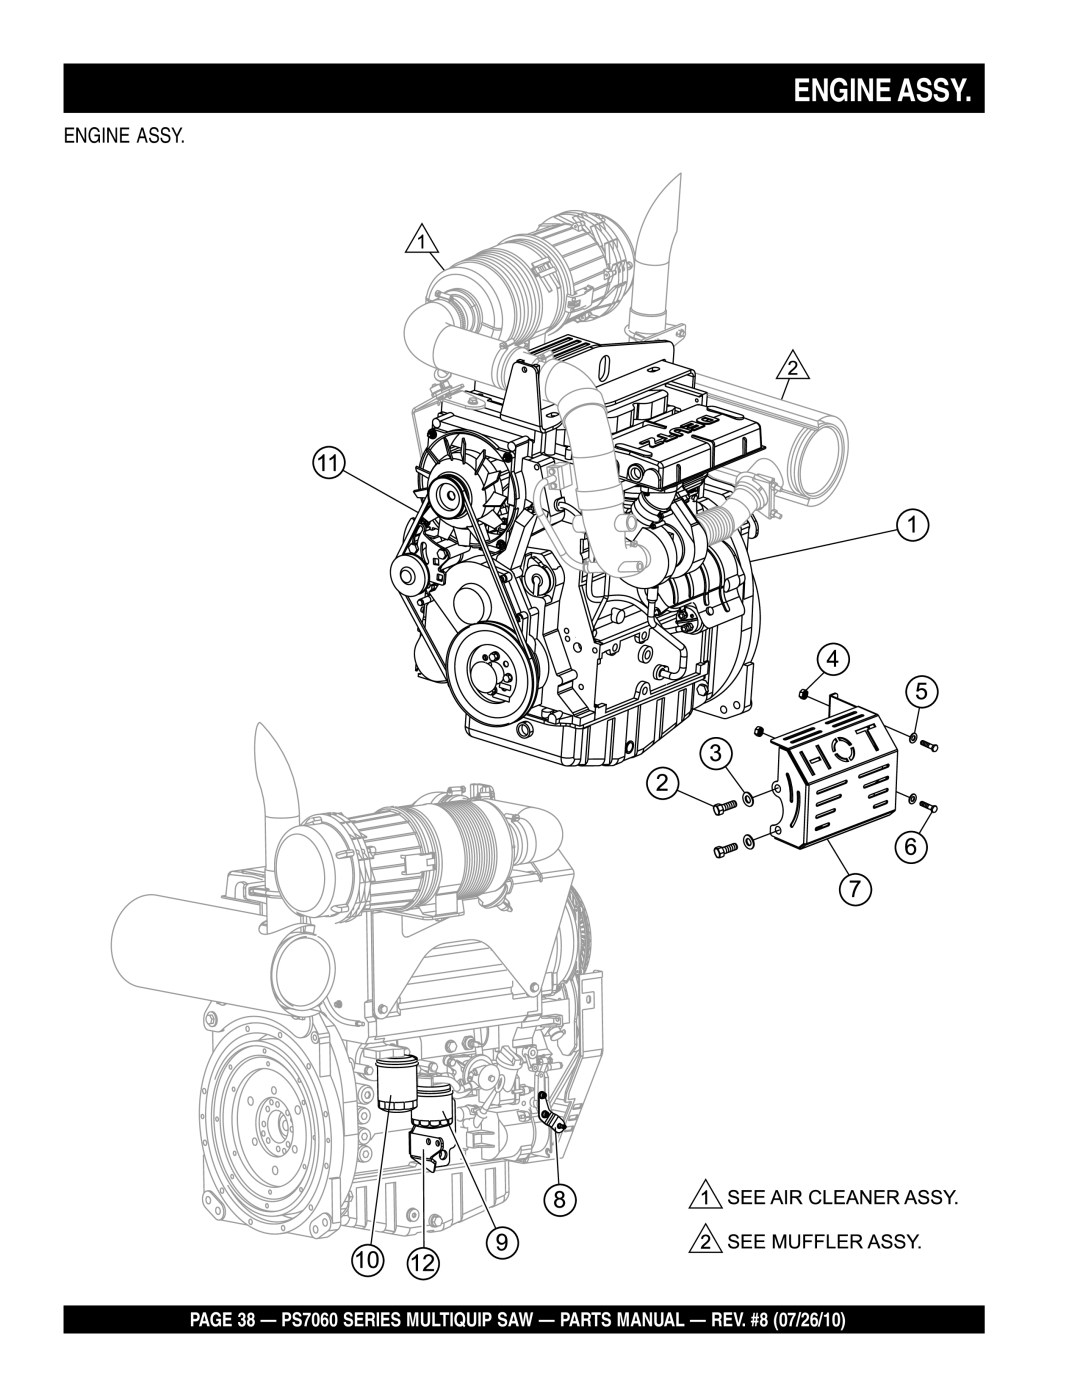 Multiquip PS706030, PS706026, PS706020, PS706036, PS706016 manual Engine Assy 